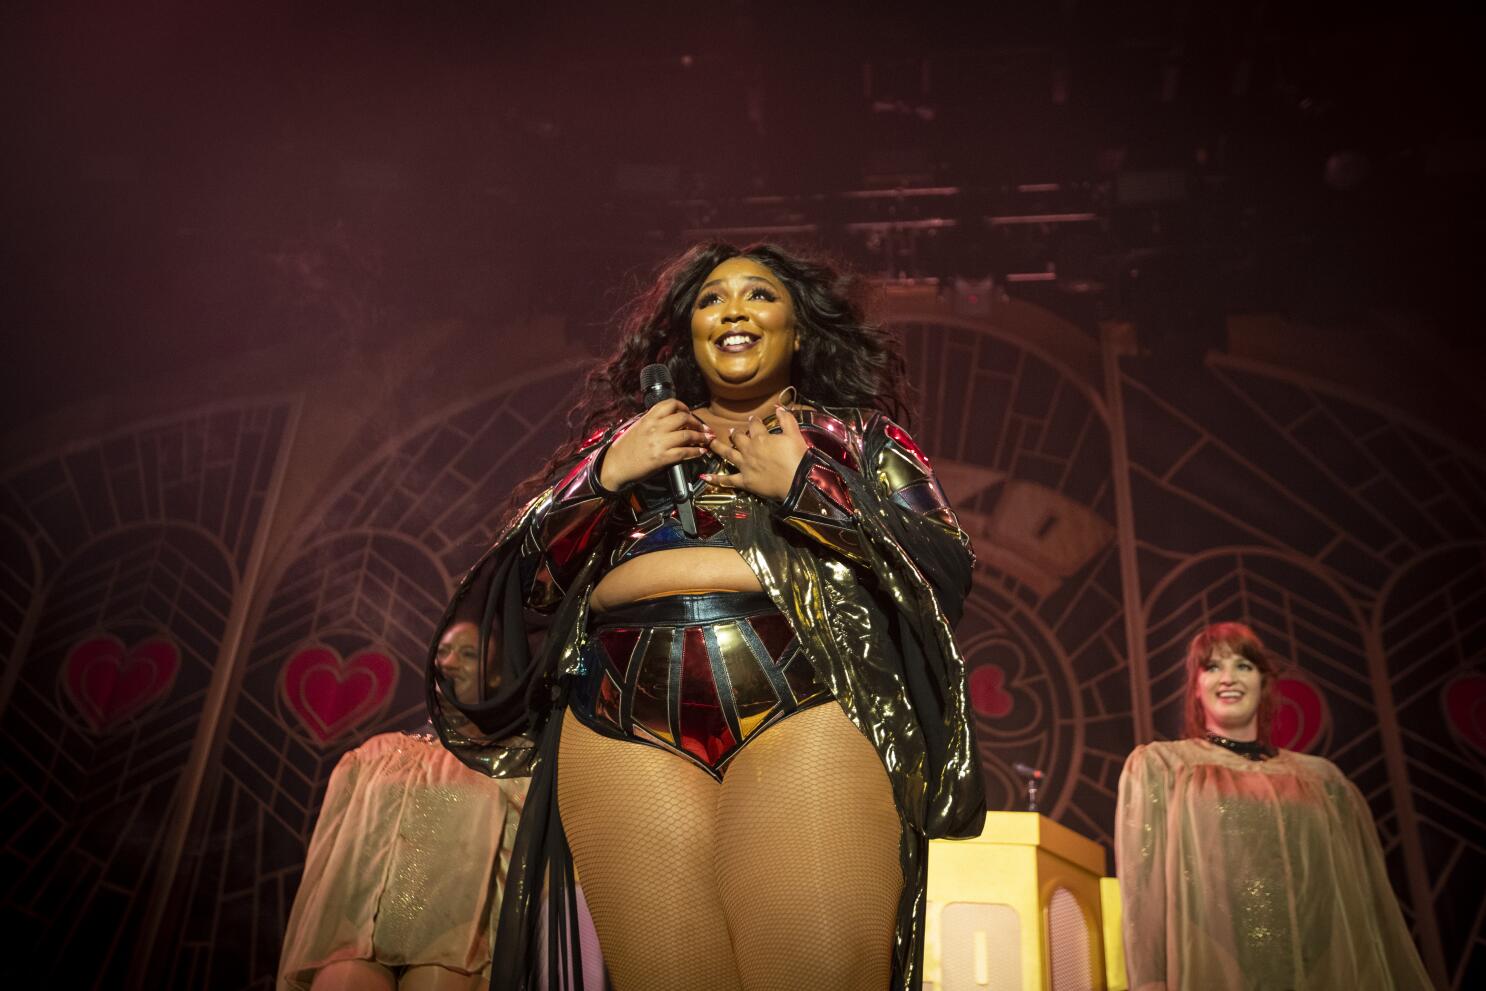 Lizzo became the one thing we all loved in 2019 - Los Angeles Times